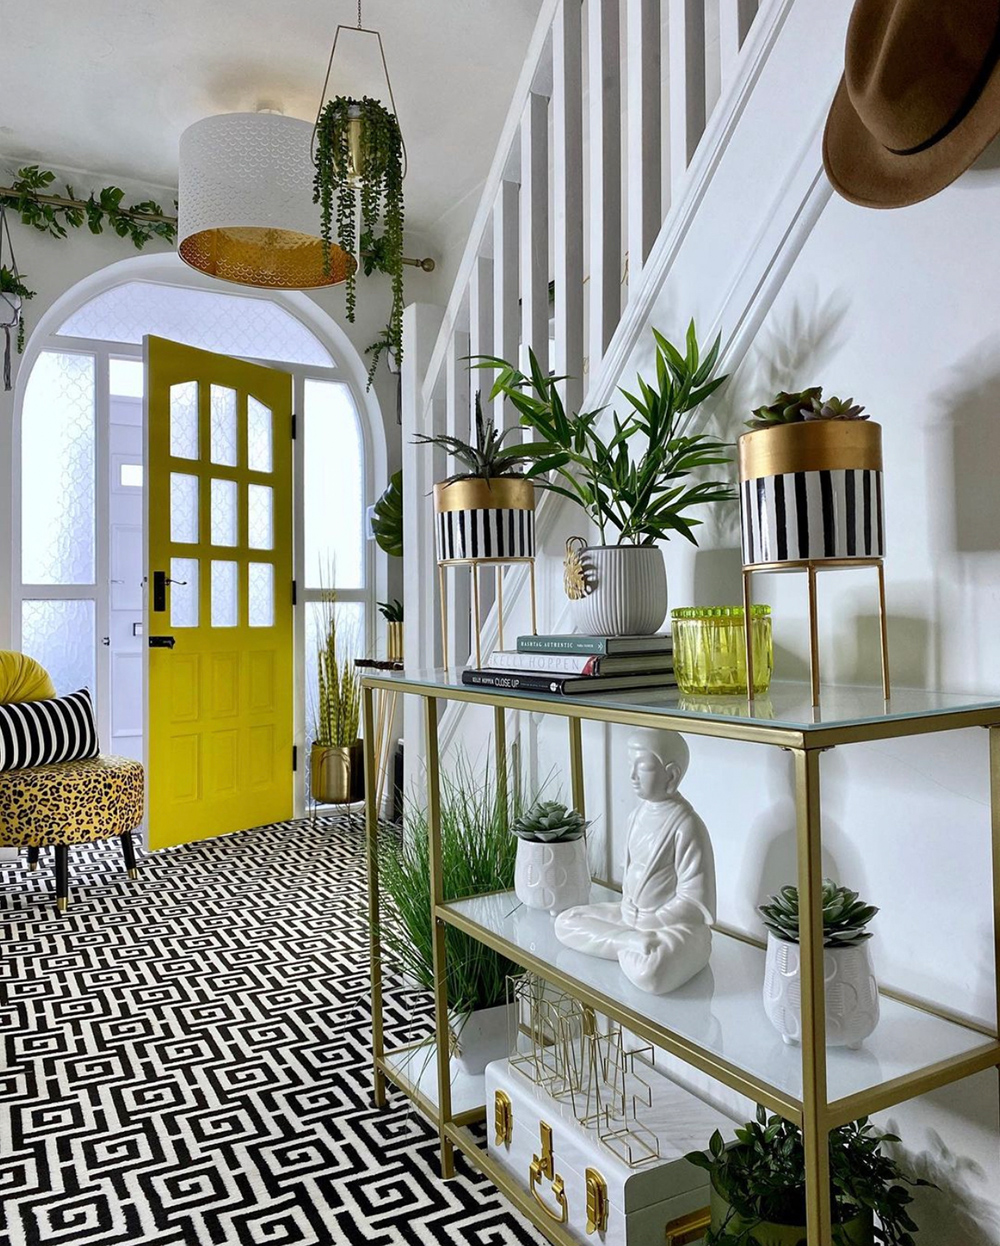 Interior colour palette combinations to inspire you. We absolutely love this black and yellow hallway with the stunning monochrome patterned carpet